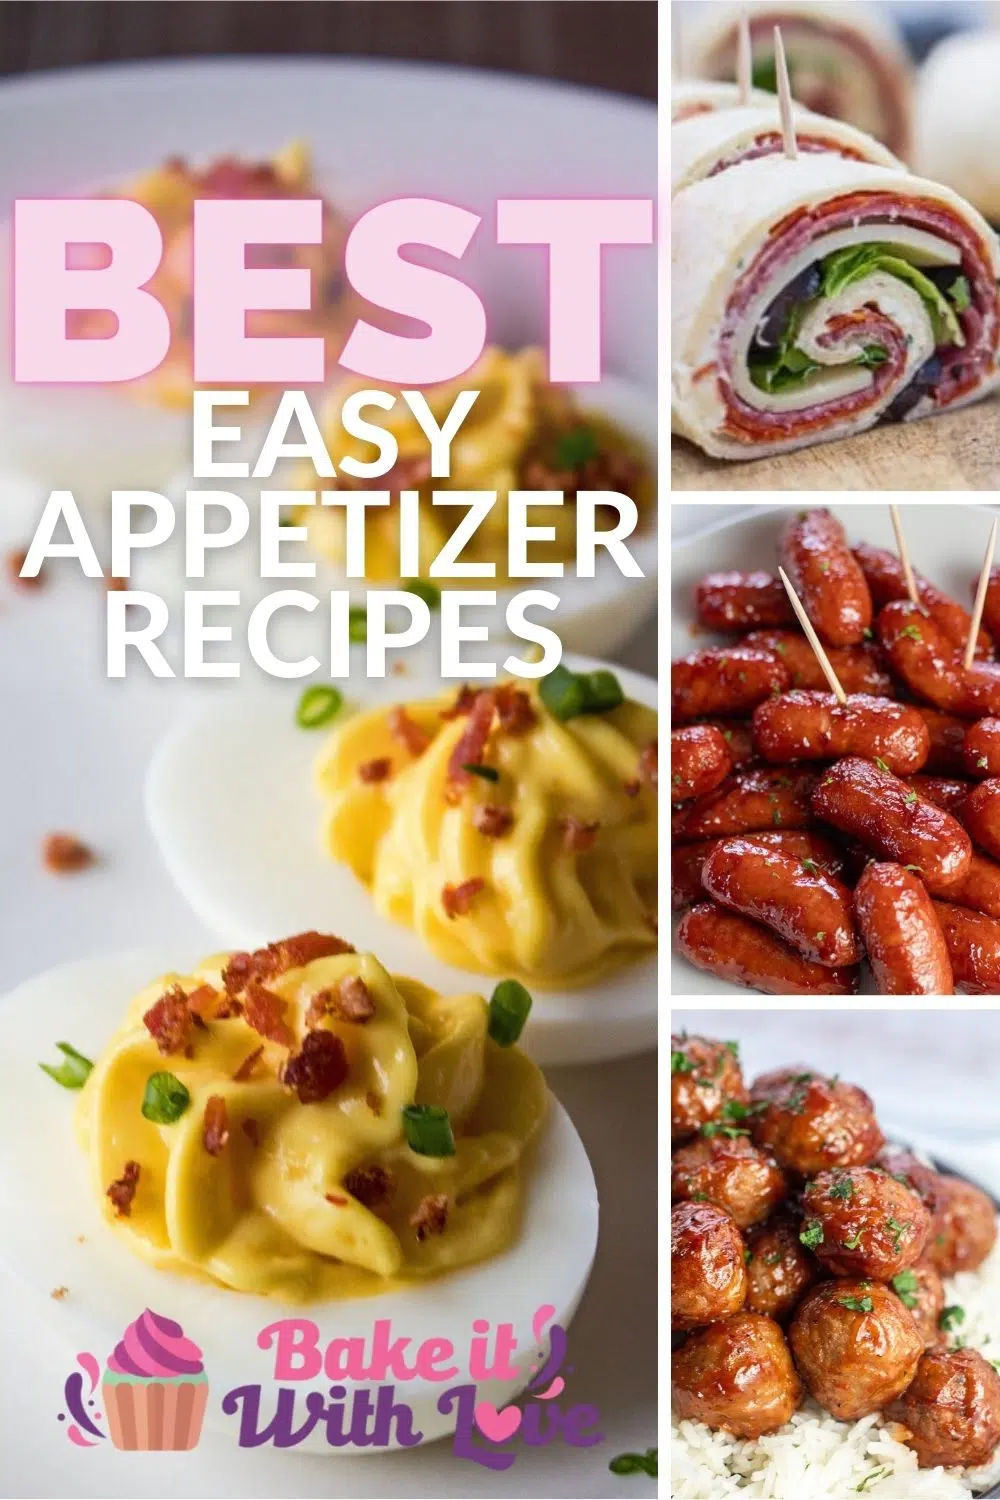 The best easy appetizers to make with 4 recipes featured in collage pin.